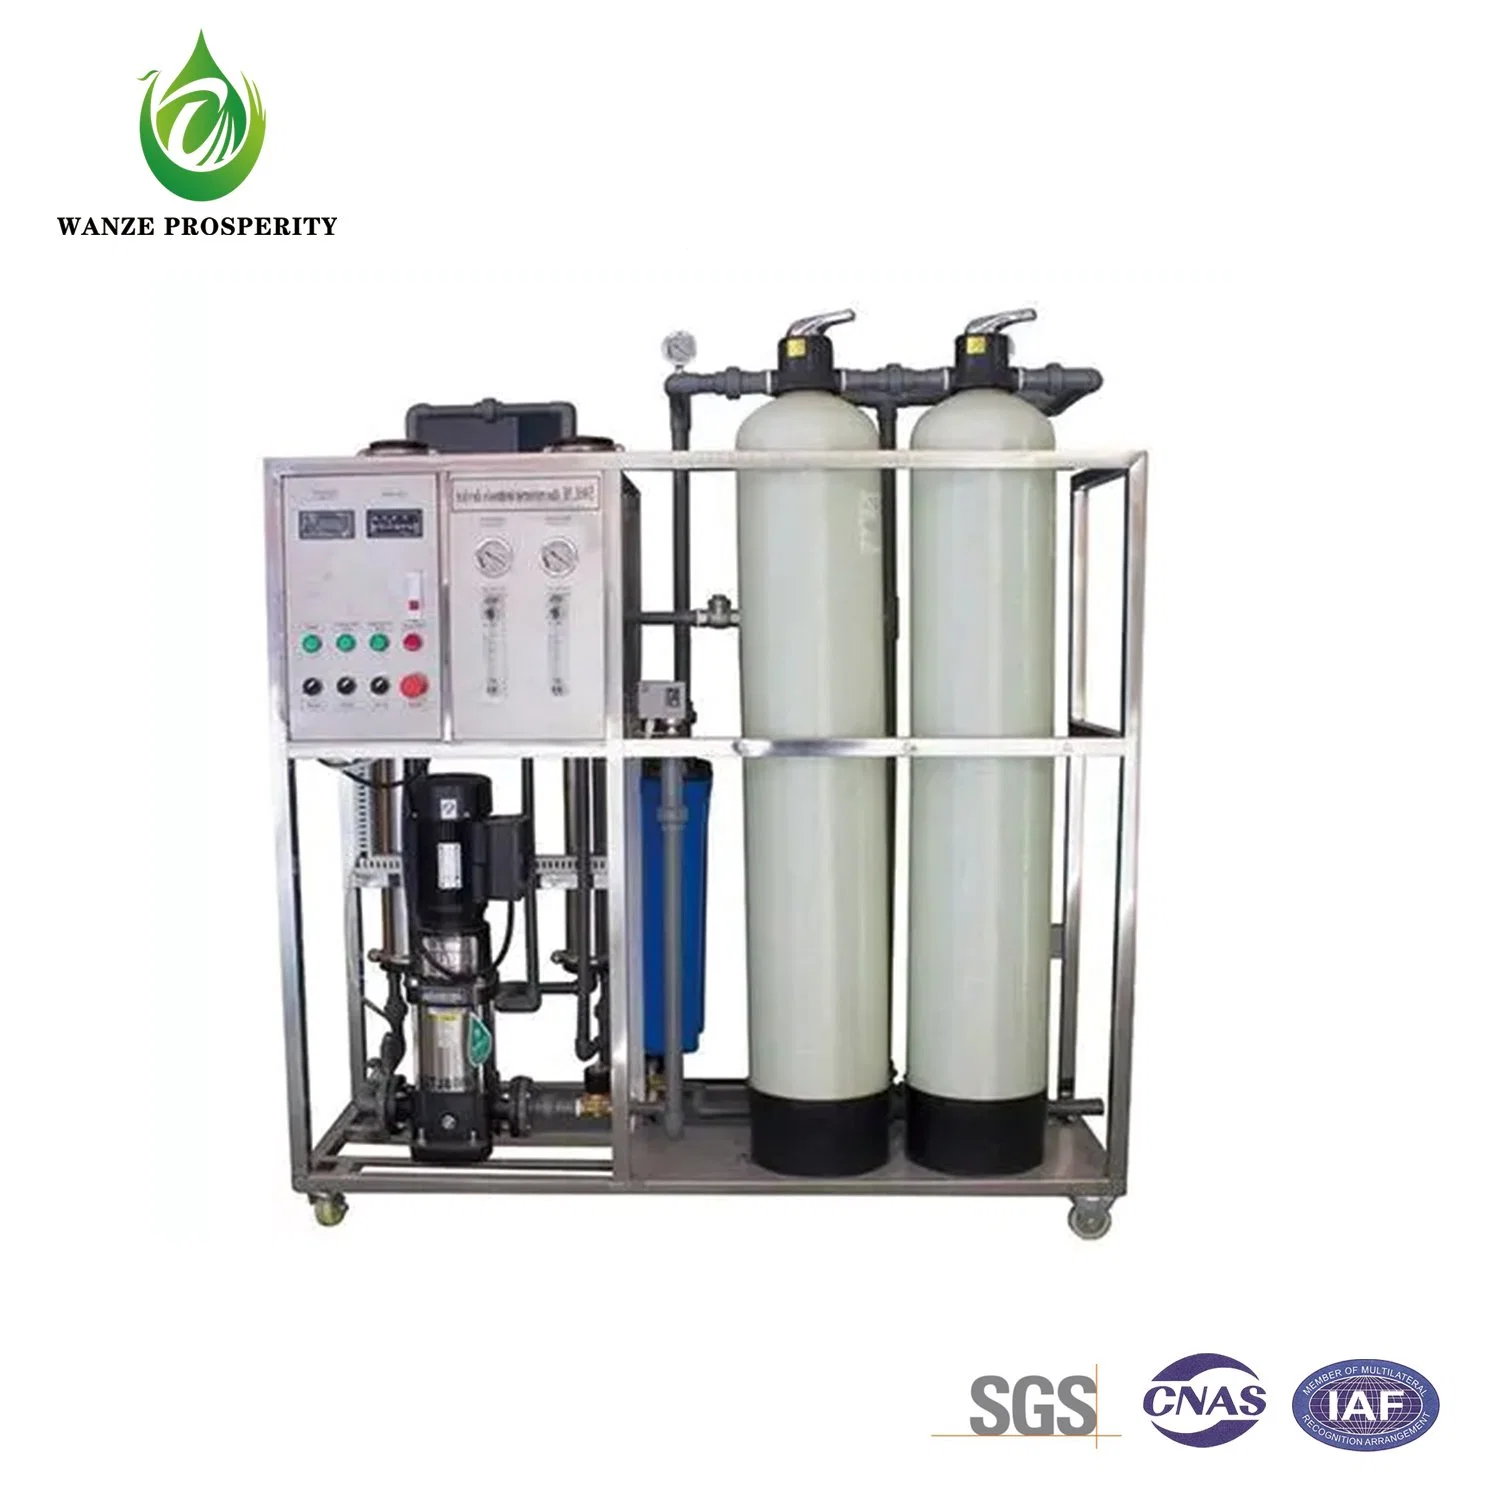 Reverse Osmosis Equipment for Small Marine Seawater Desalination Filters